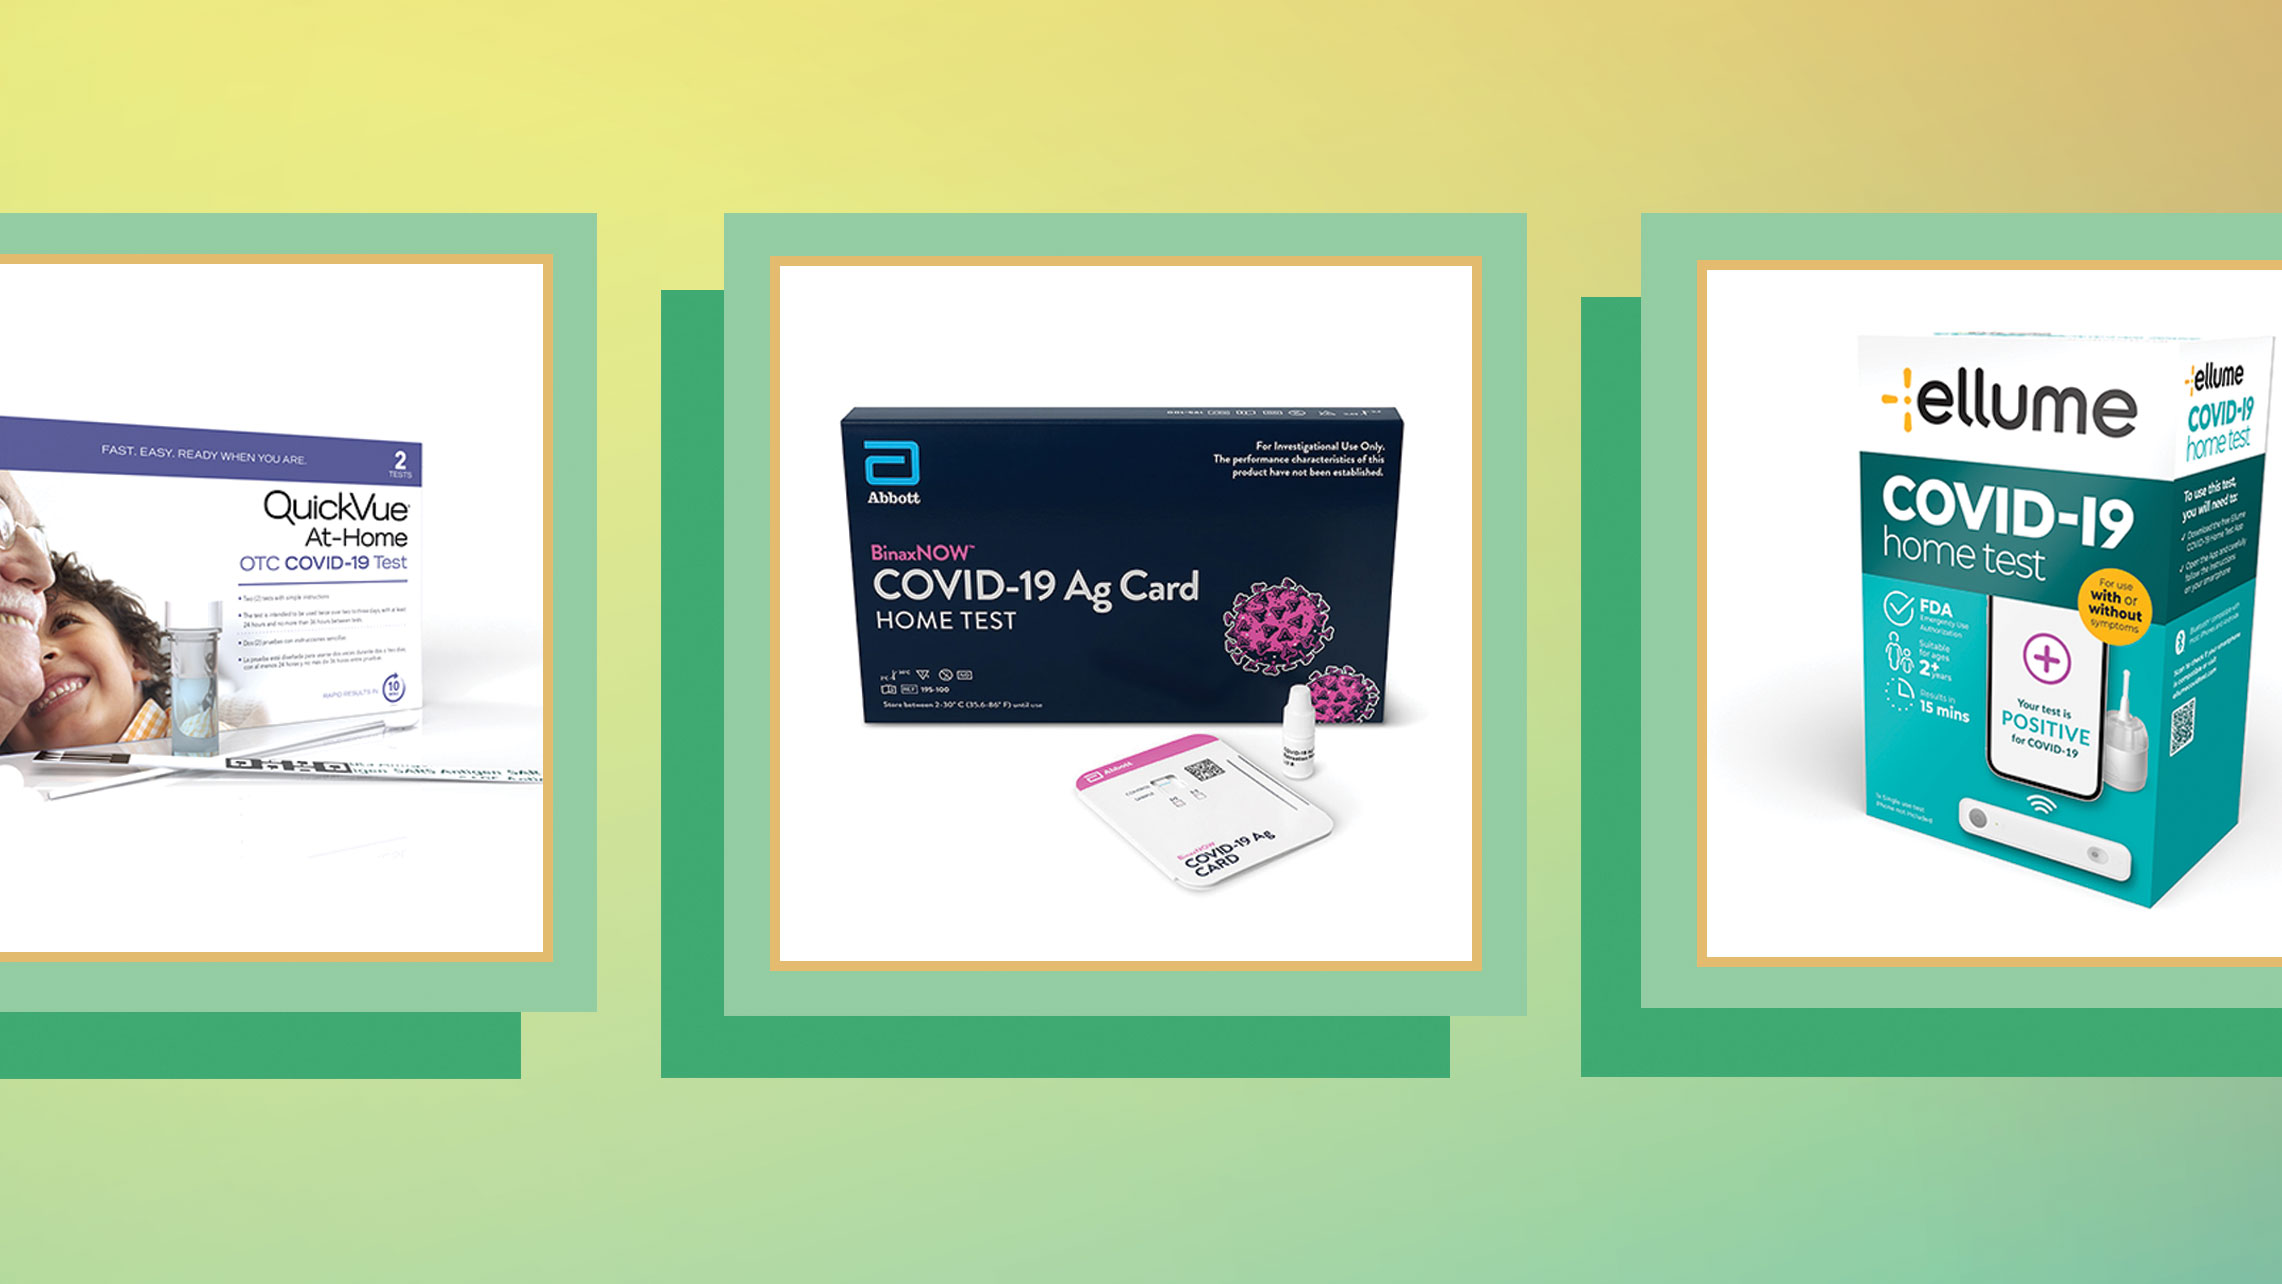 At-home over-the-counter COVID-19 tests will be available at retail stores without a prescription.